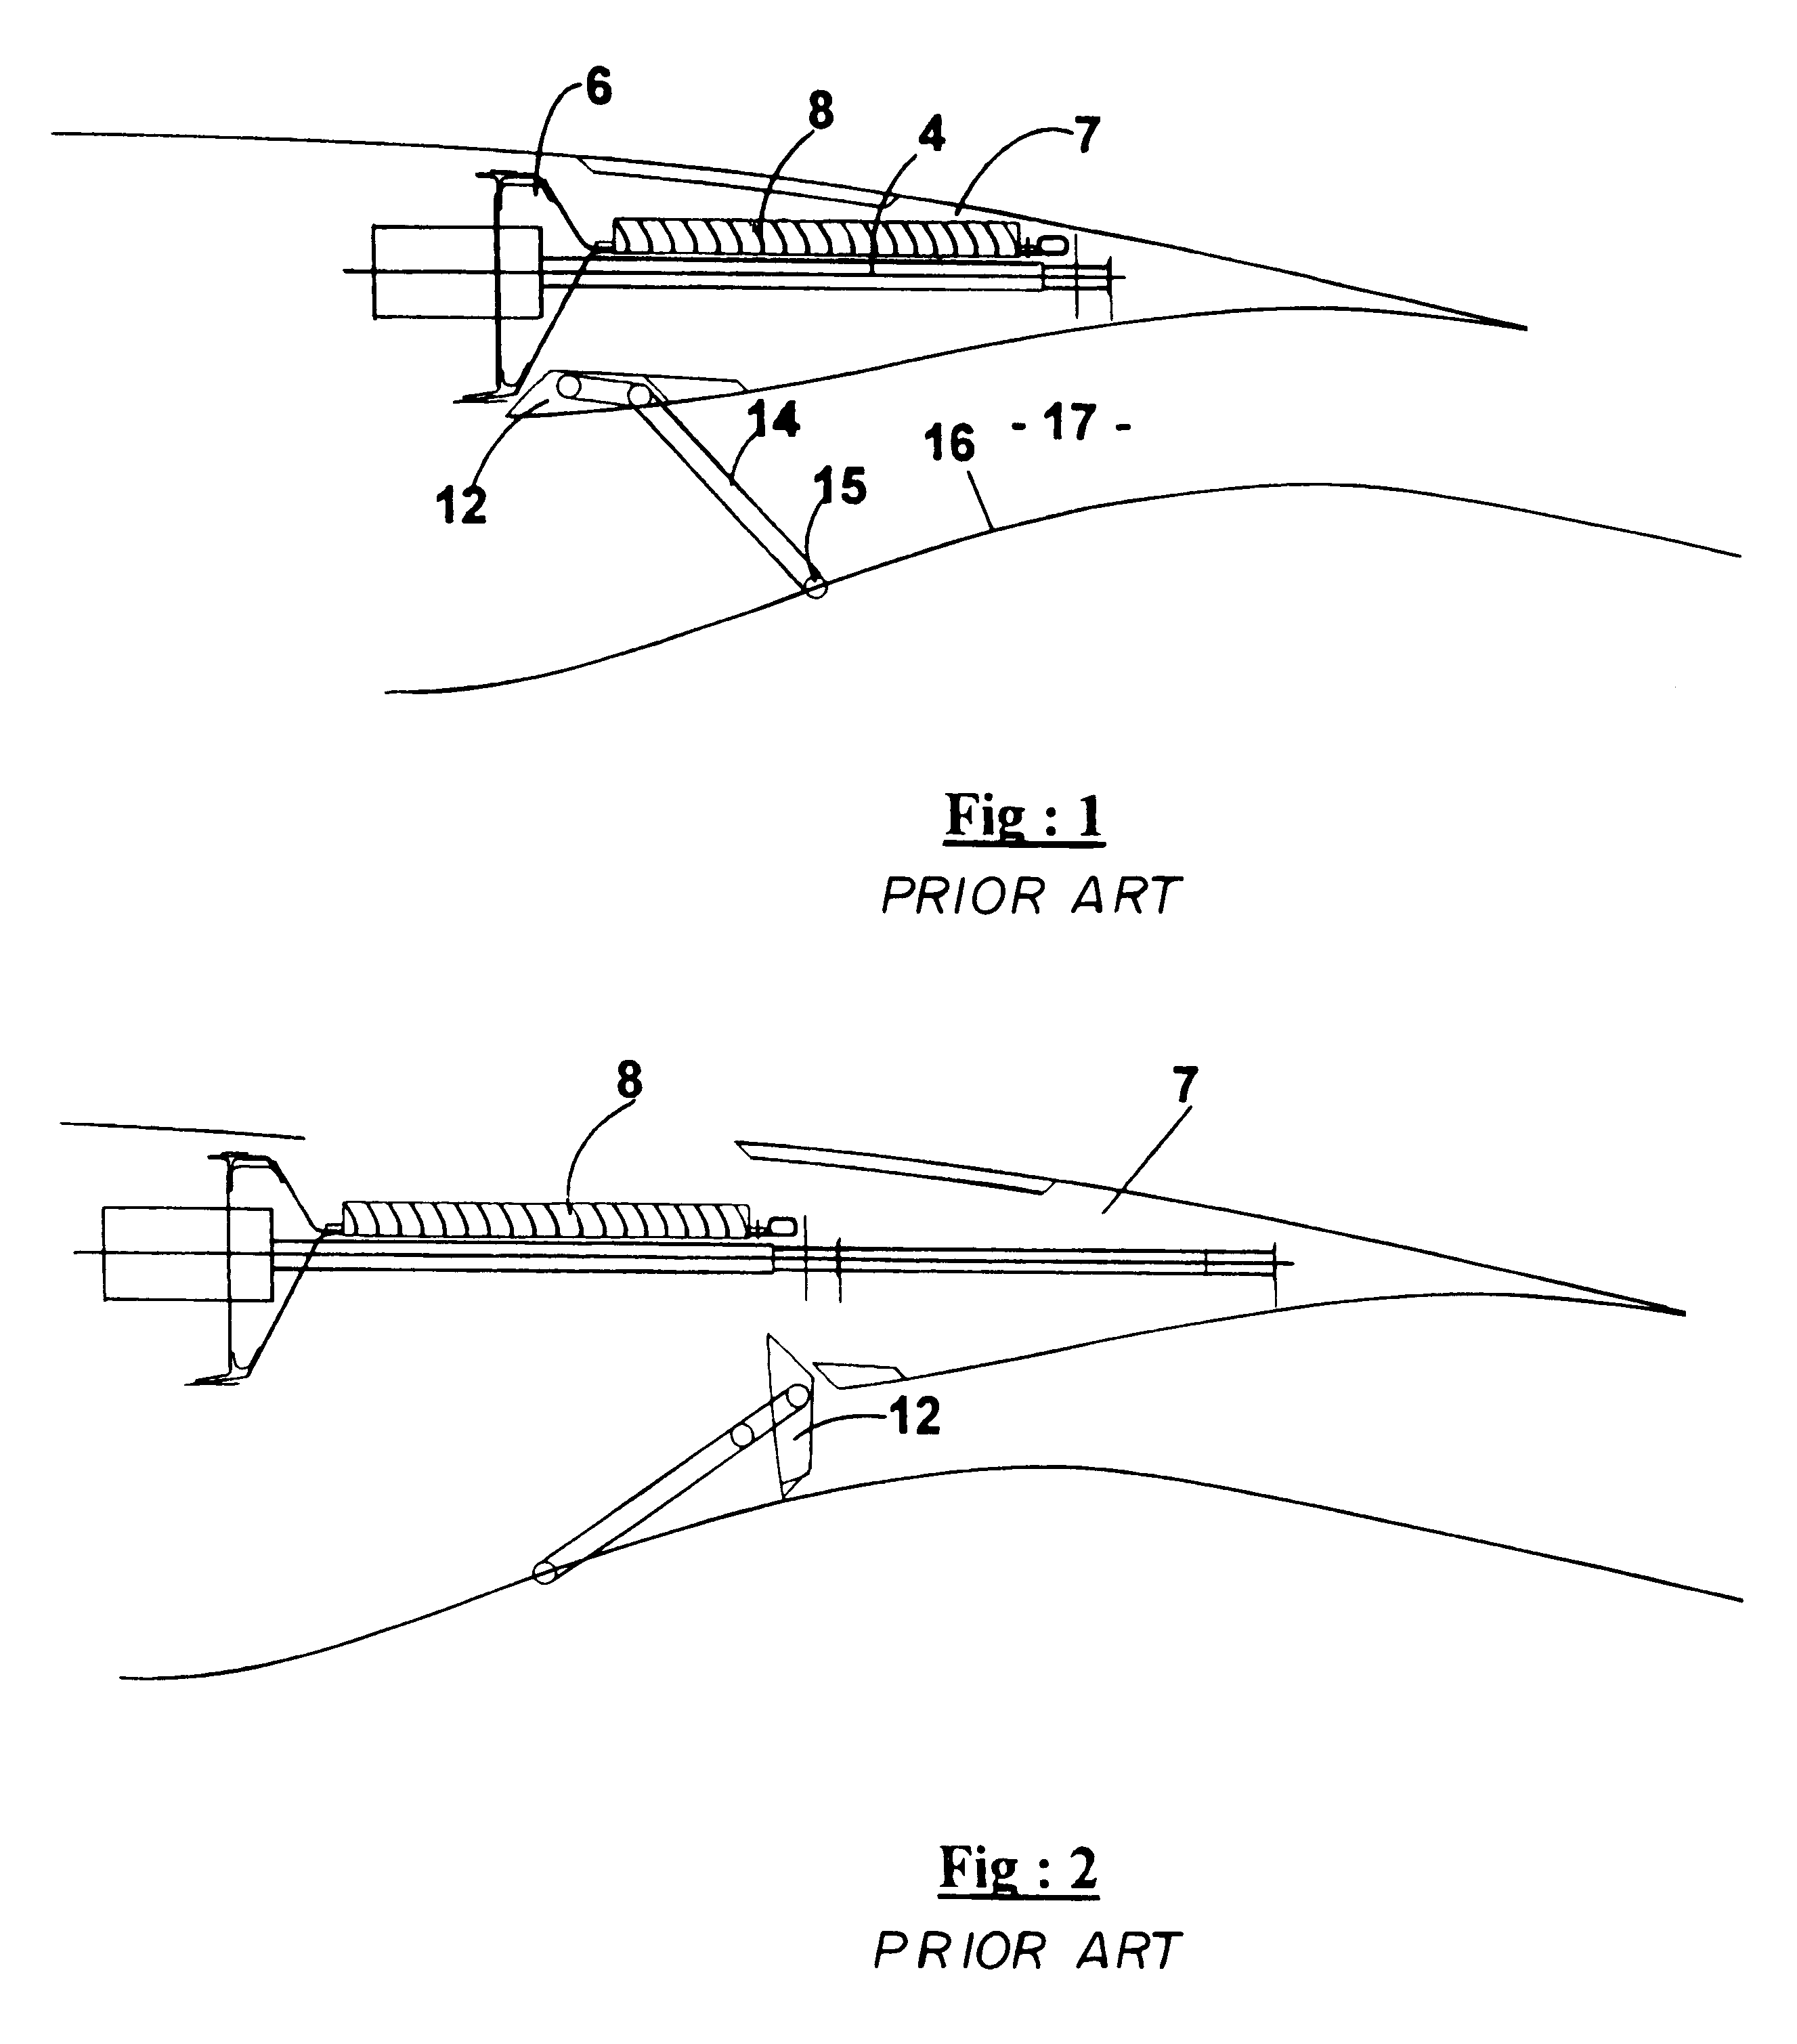 Thrust reverser with mutually configurable baffles